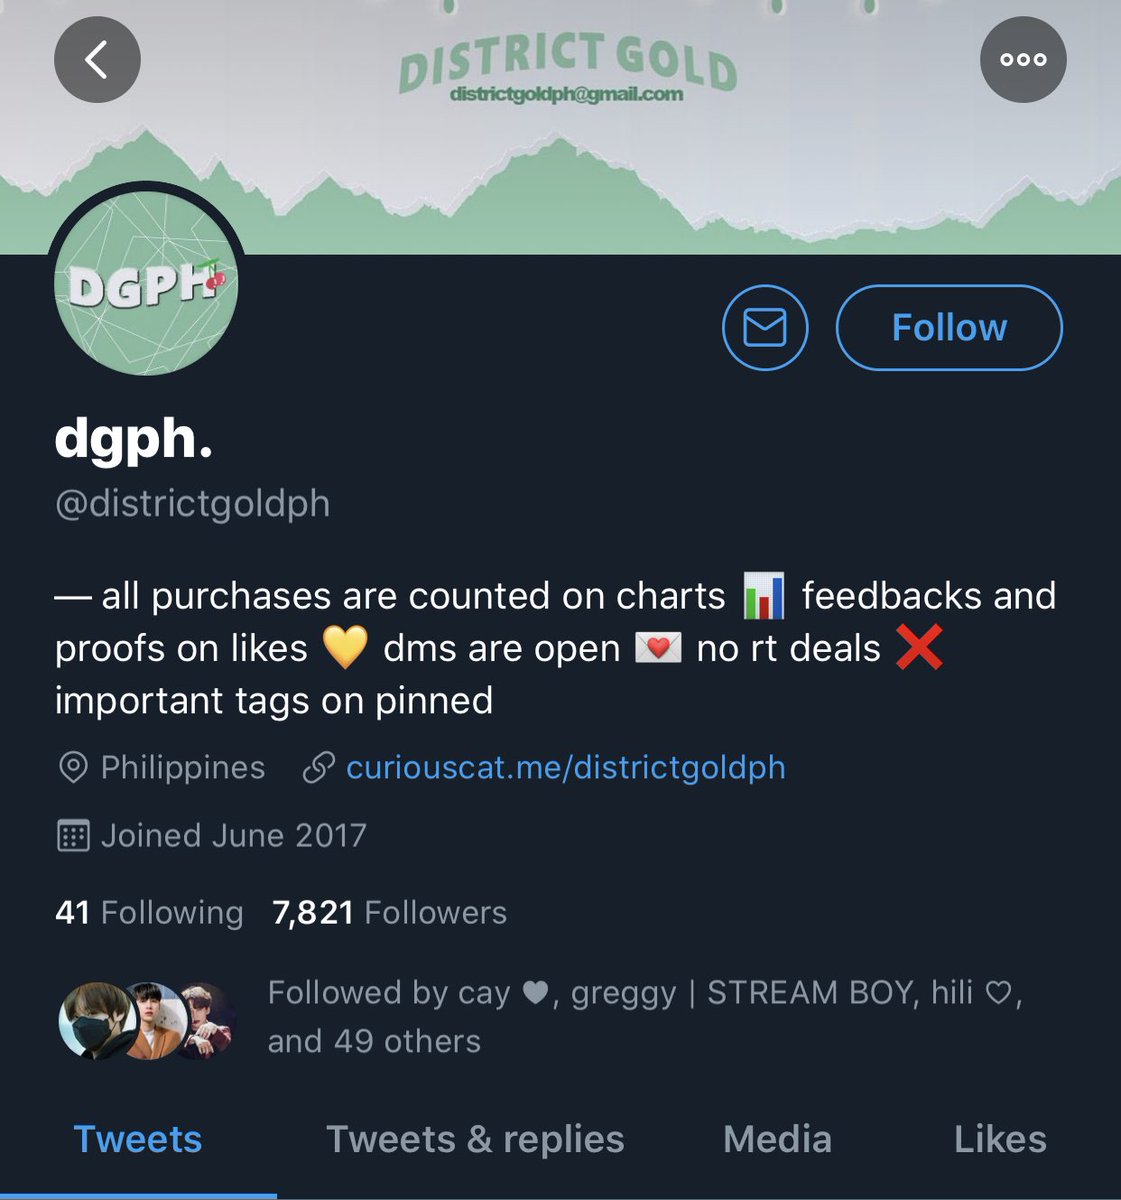  @districtgoldph - puno TL neto ng feedbacks galing customers nila wc means super hands on sila sa customers!!!!- friend recommended me this shop will order from here soon 